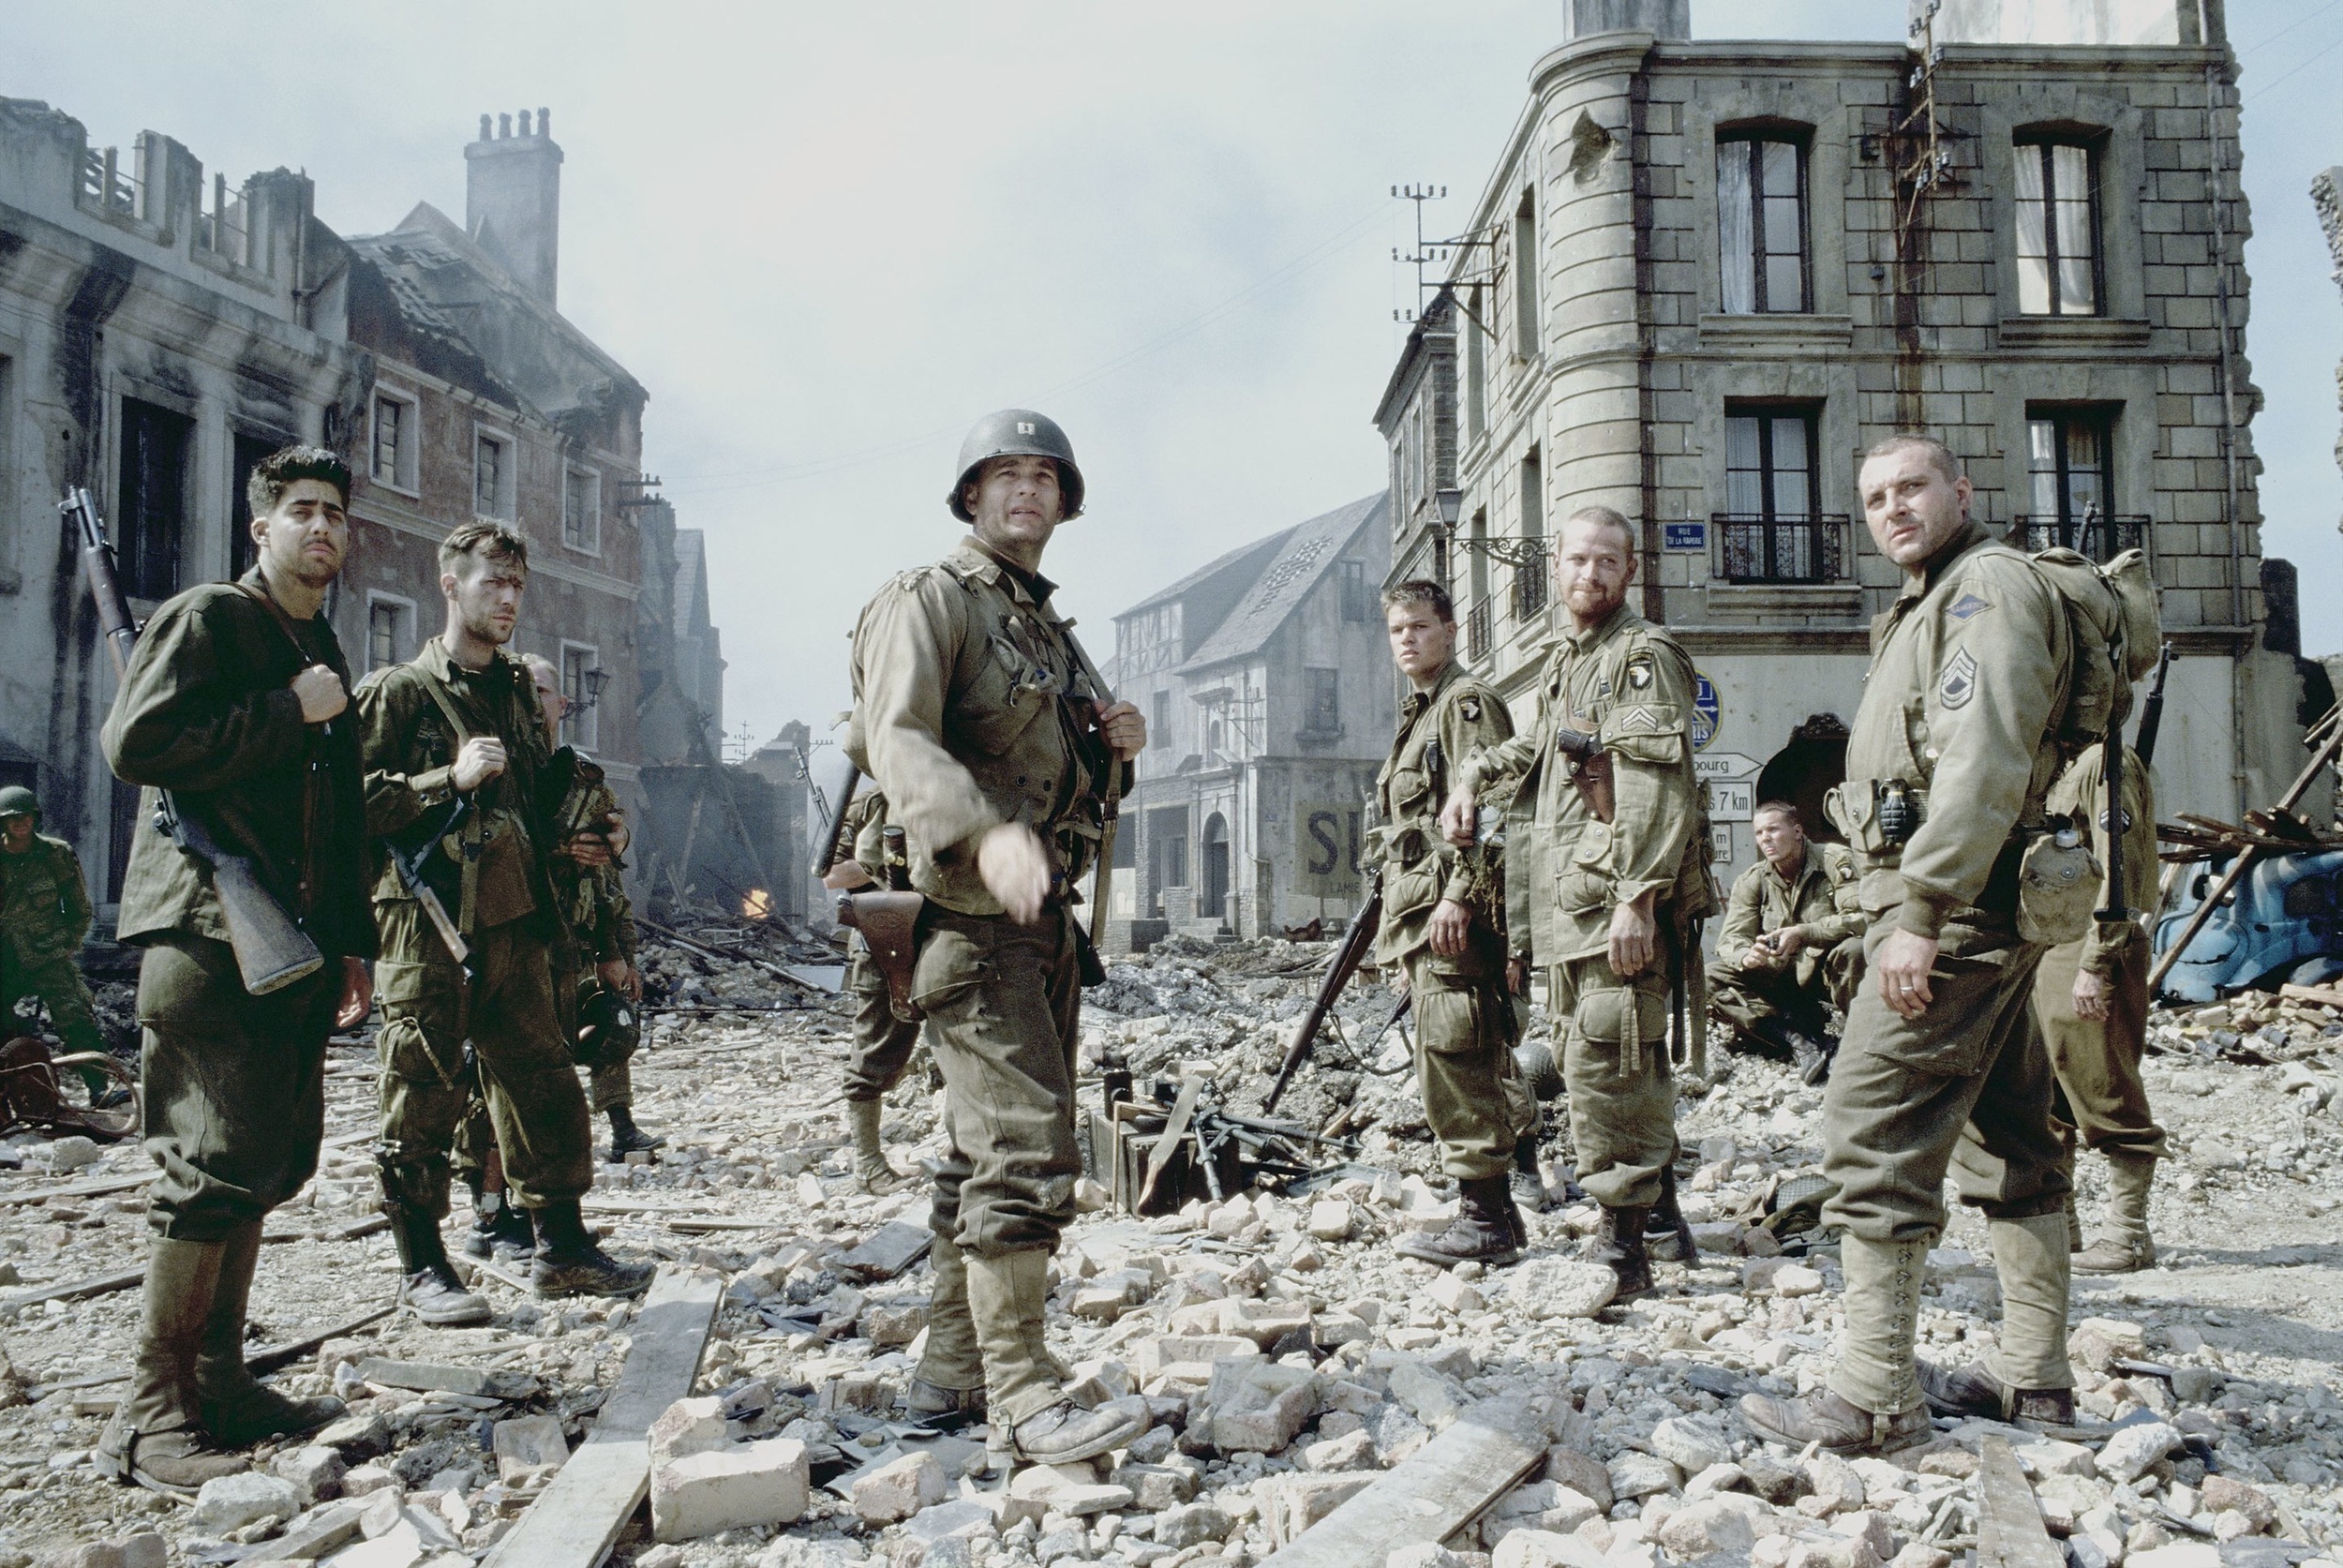 <p><em>Saving Private Ryan</em> opened atop the U.S. box office and remained the top film in the country for four weeks. By the end of its run, it had made $216.5 million in the United States and Canada and $481.8 million worldwide. It was the highest-grossing film in the United States and the second-highest-grossing movie worldwide.</p><p>You may also like: <a href='https://www.yardbarker.com/entertainment/articles/20_essential_songs_about_california/s1__37362811'>20 essential songs about California</a></p>